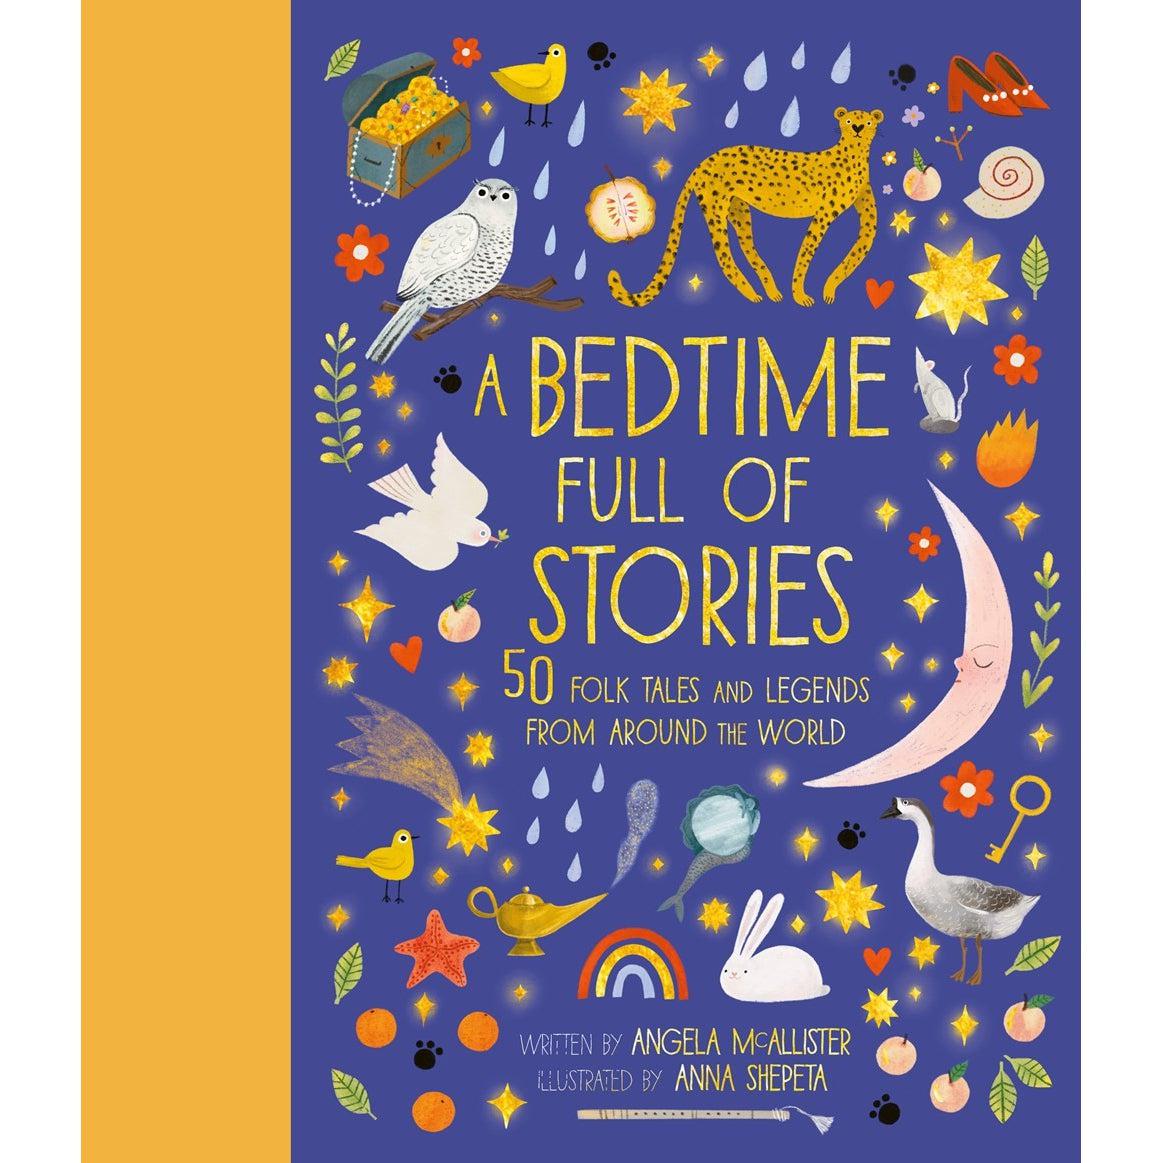 A Bedtime Full Of Stories : 50 Folktales And Legends From Around The World - Angela Mcallister (Hardback)